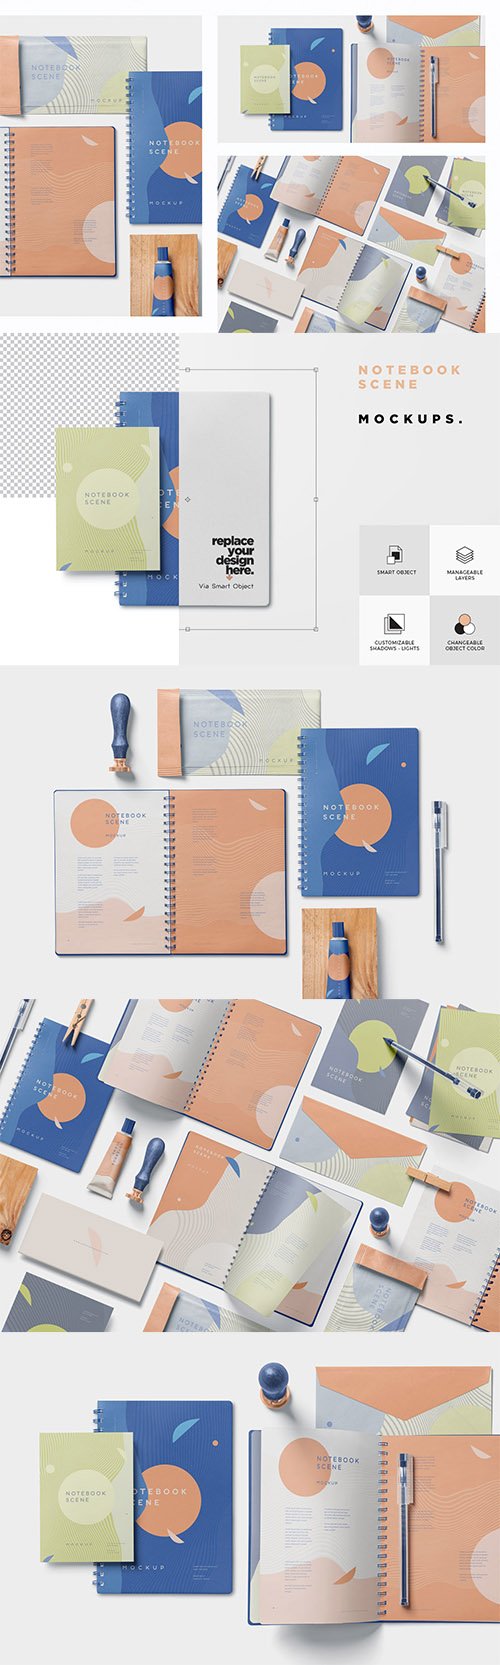 3 Notebook Mockups With Movable Elements PSD